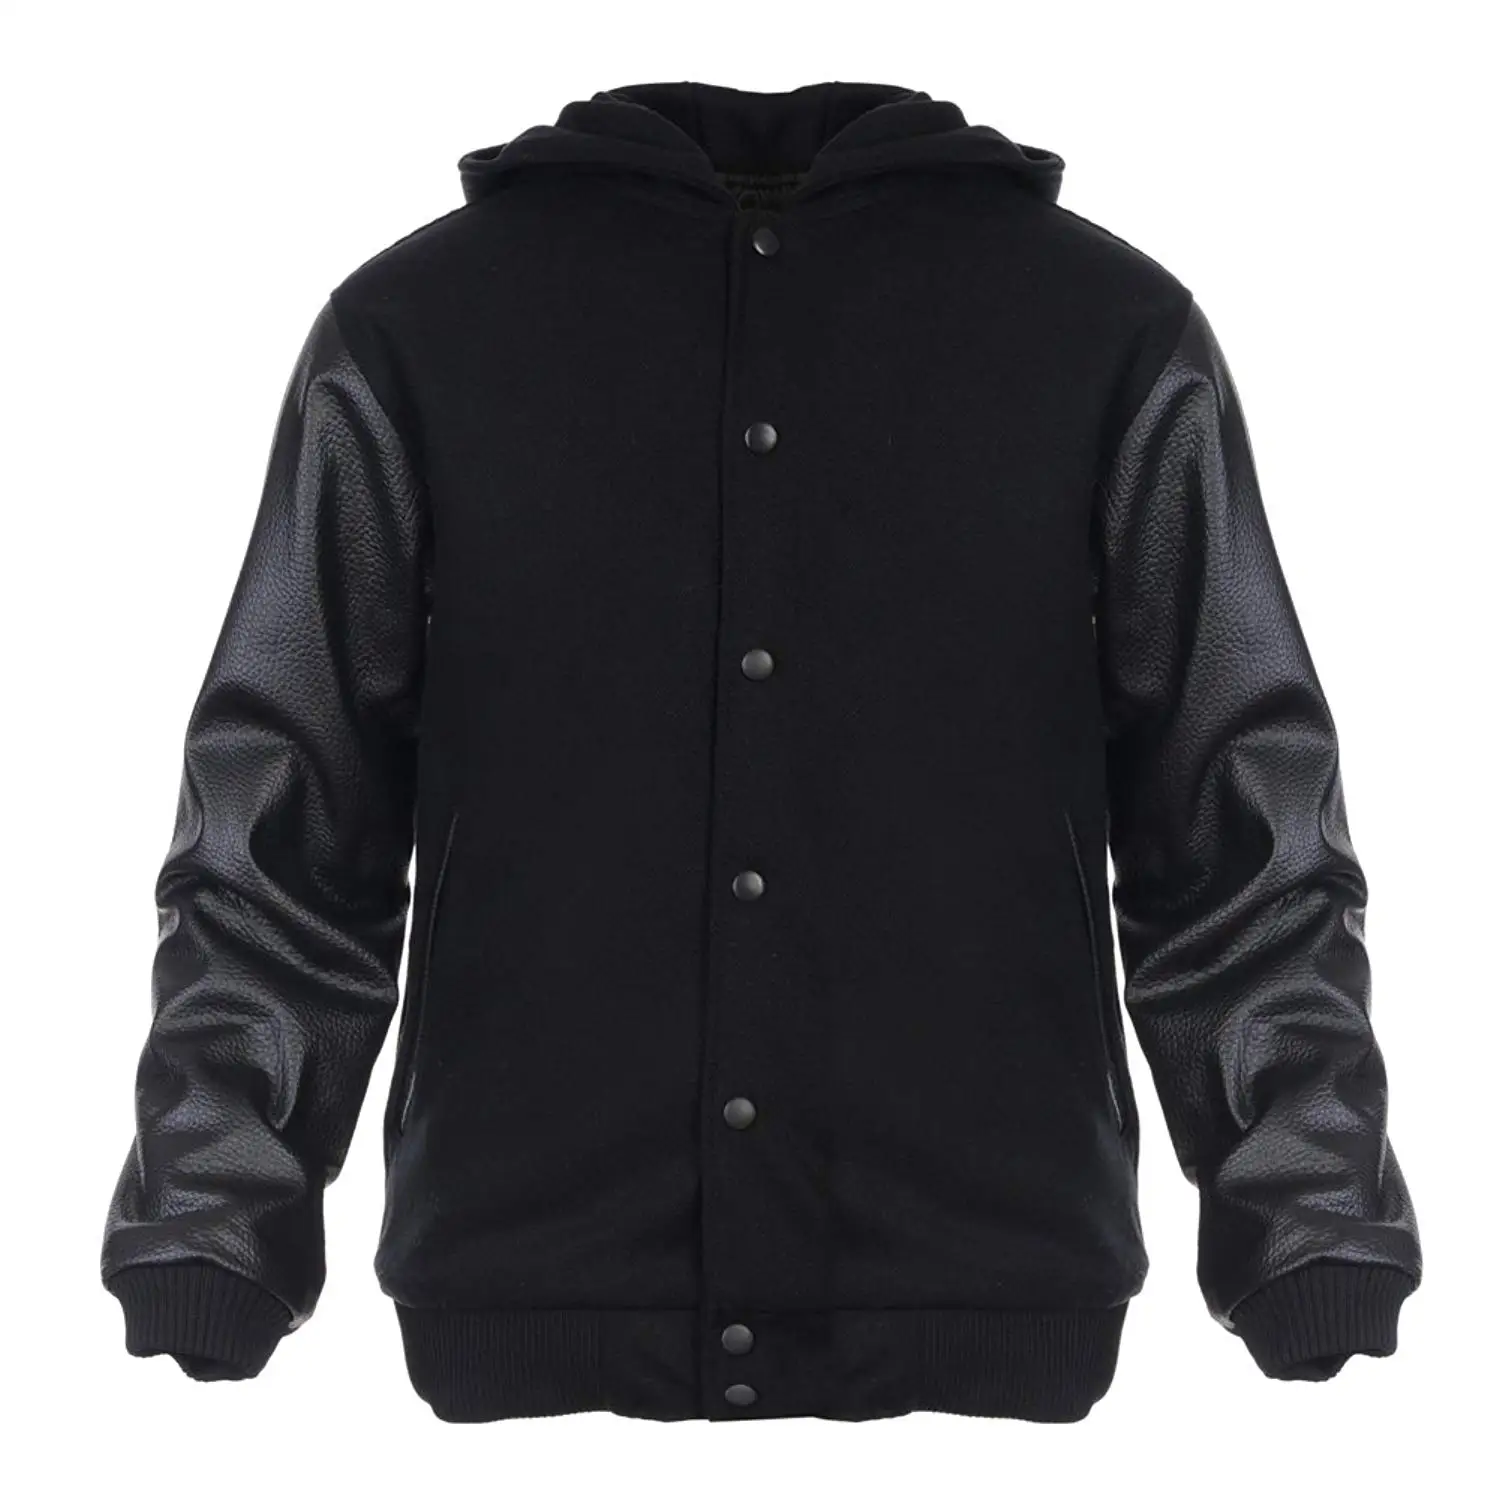 Cheap Black Leather Jacket With Grey Hoodie, find Black Leather Jacket